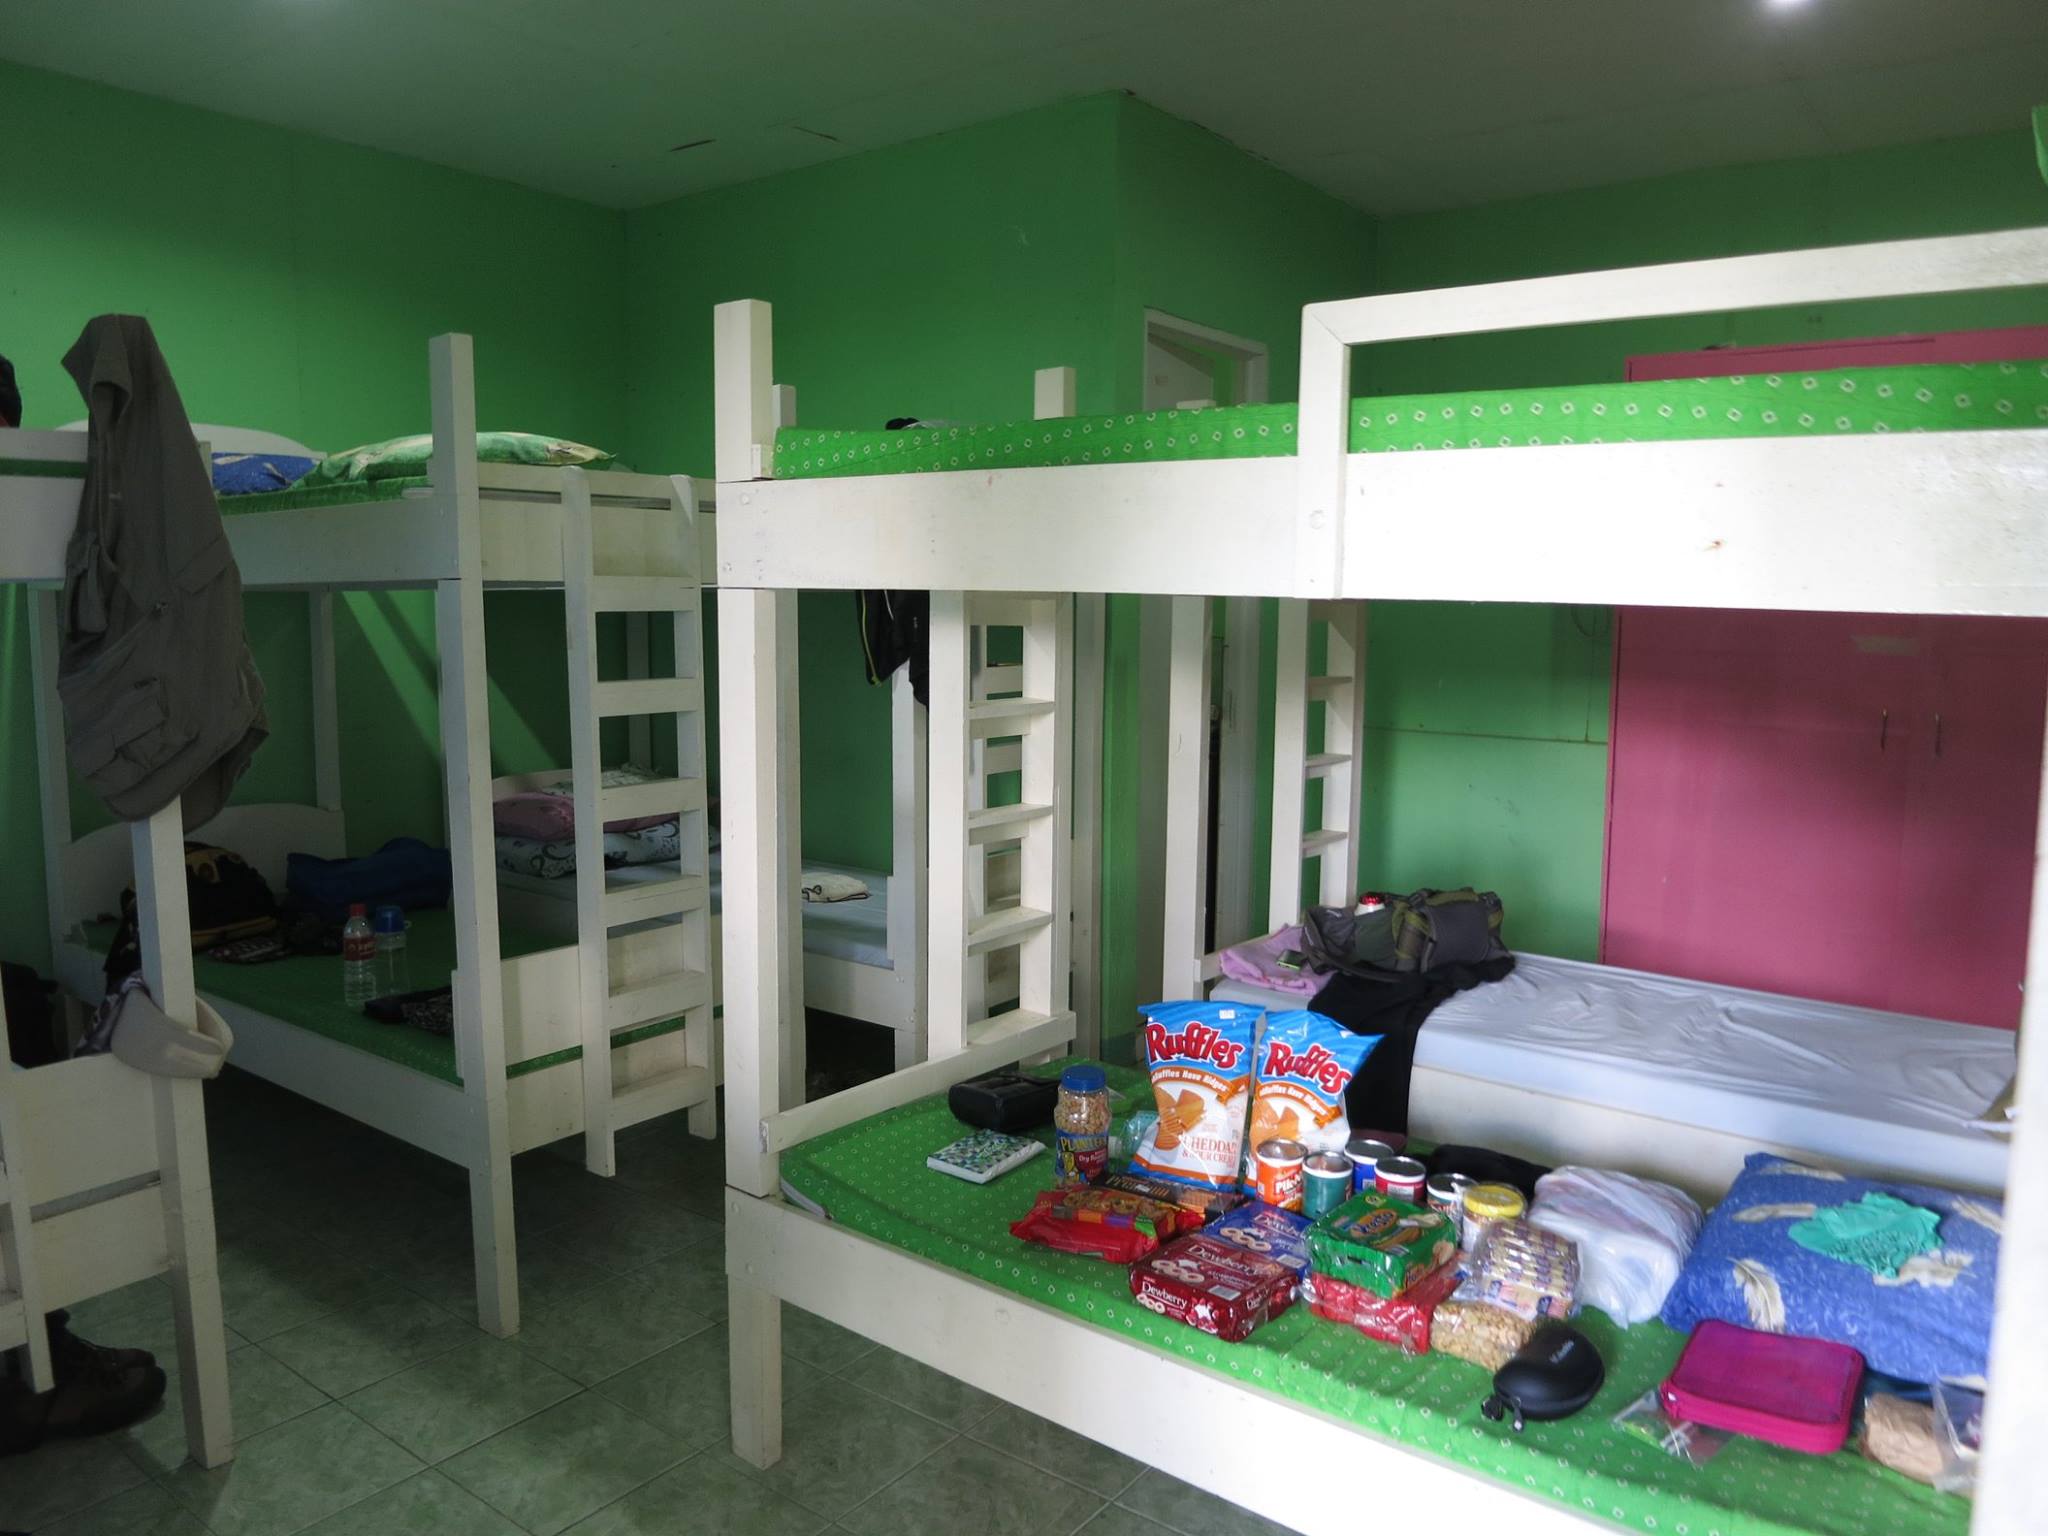 Bunk bed filled with supplies purchased in Tacloban. Photo by Ixi Mapua.